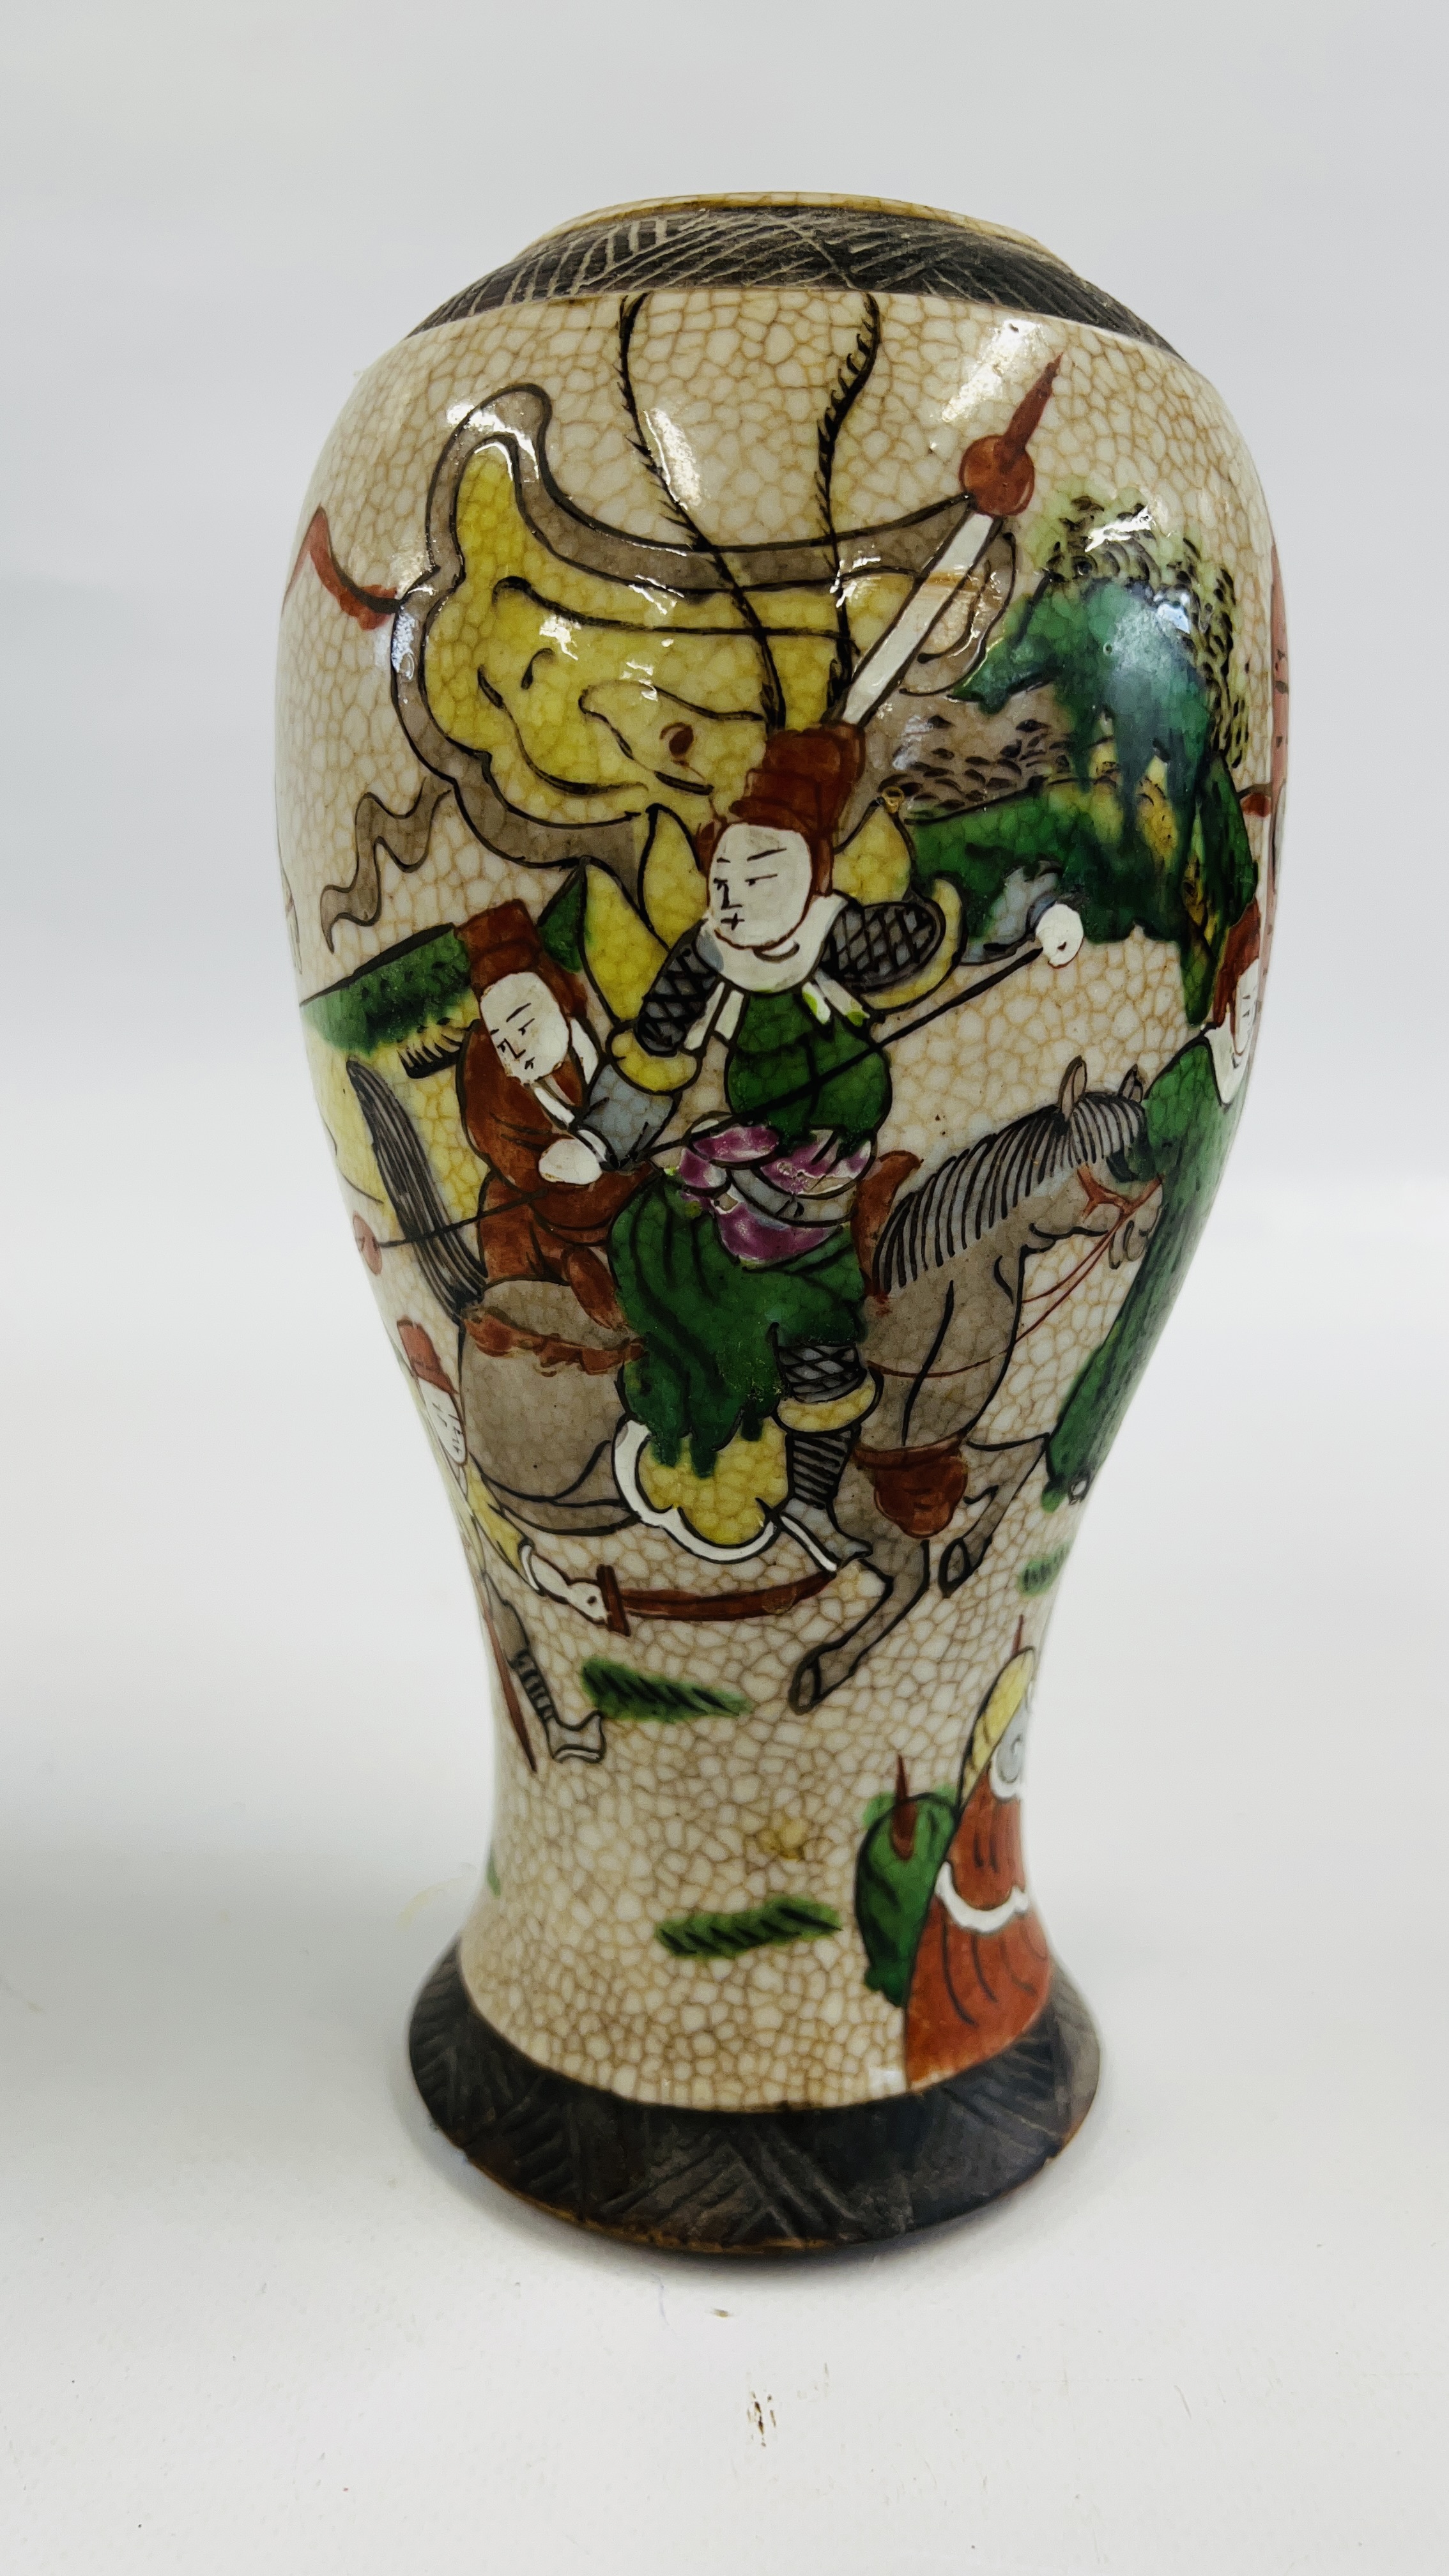 A CHINESE NANJING STYLE CRACKLED GLAZED VASE DECORATED WITH CHARACTERS AND WARRIORS UPON HORSEBACK - Image 3 of 7